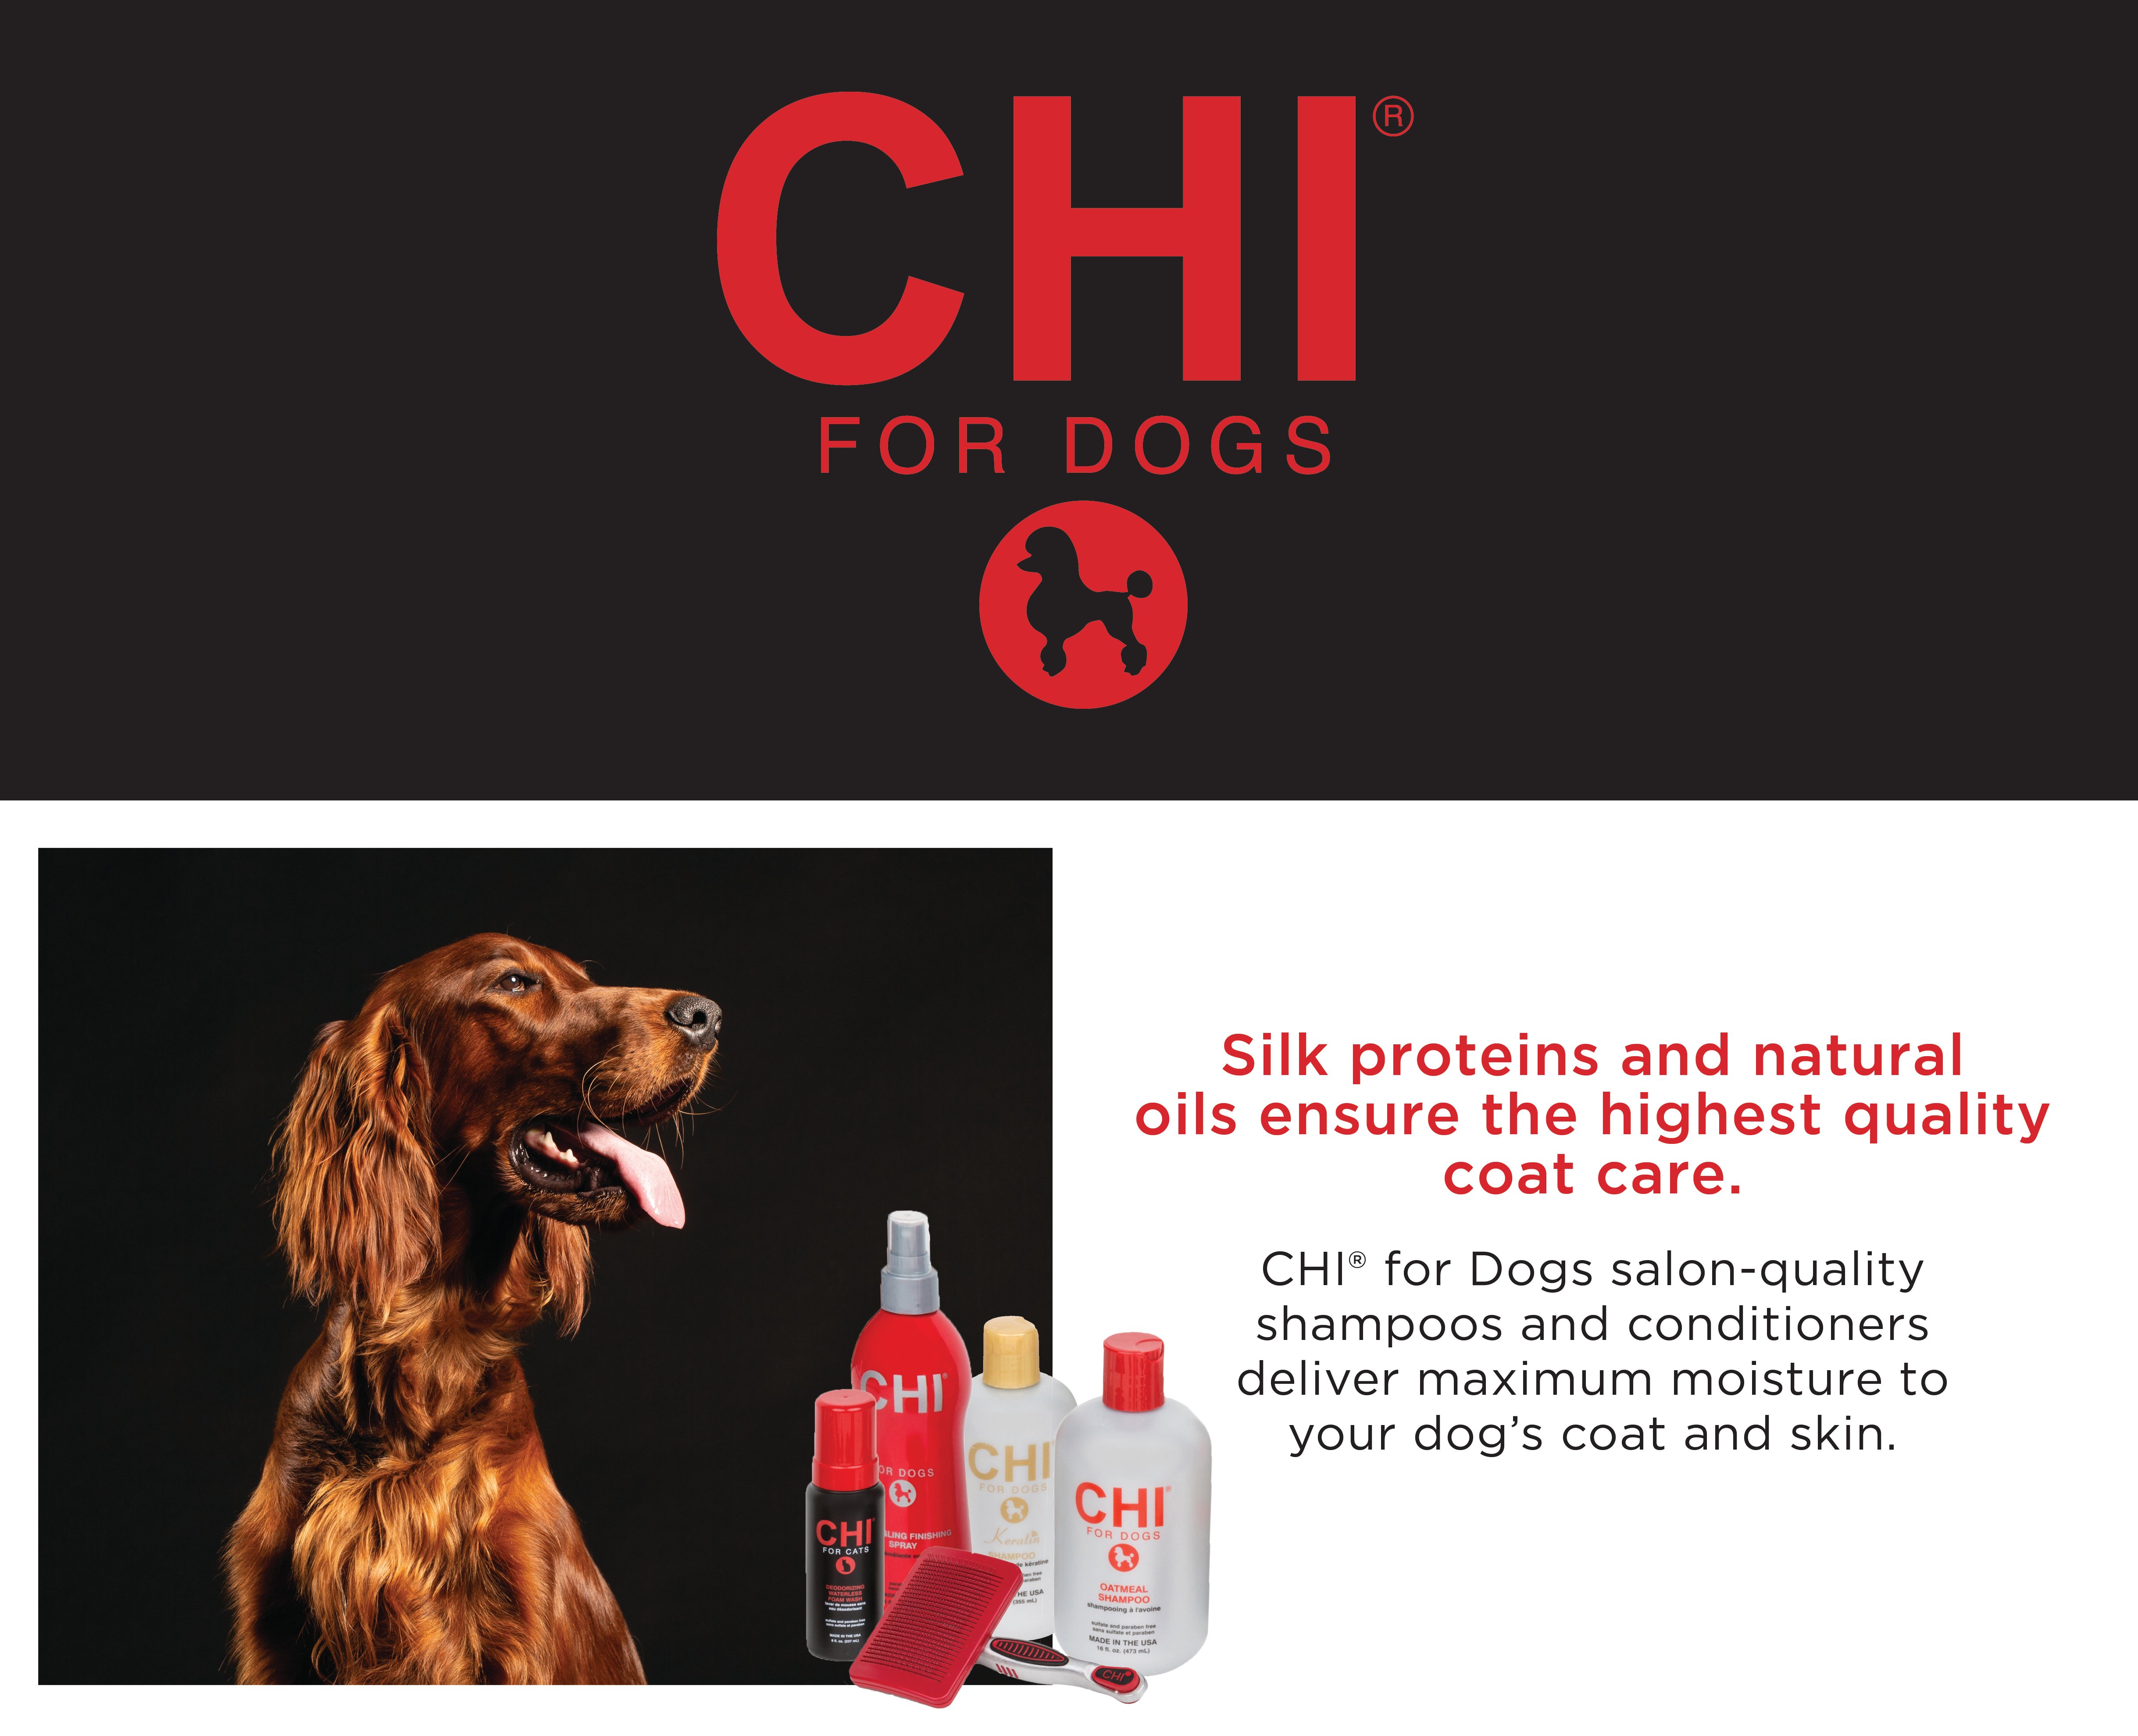 CHI for Dogs